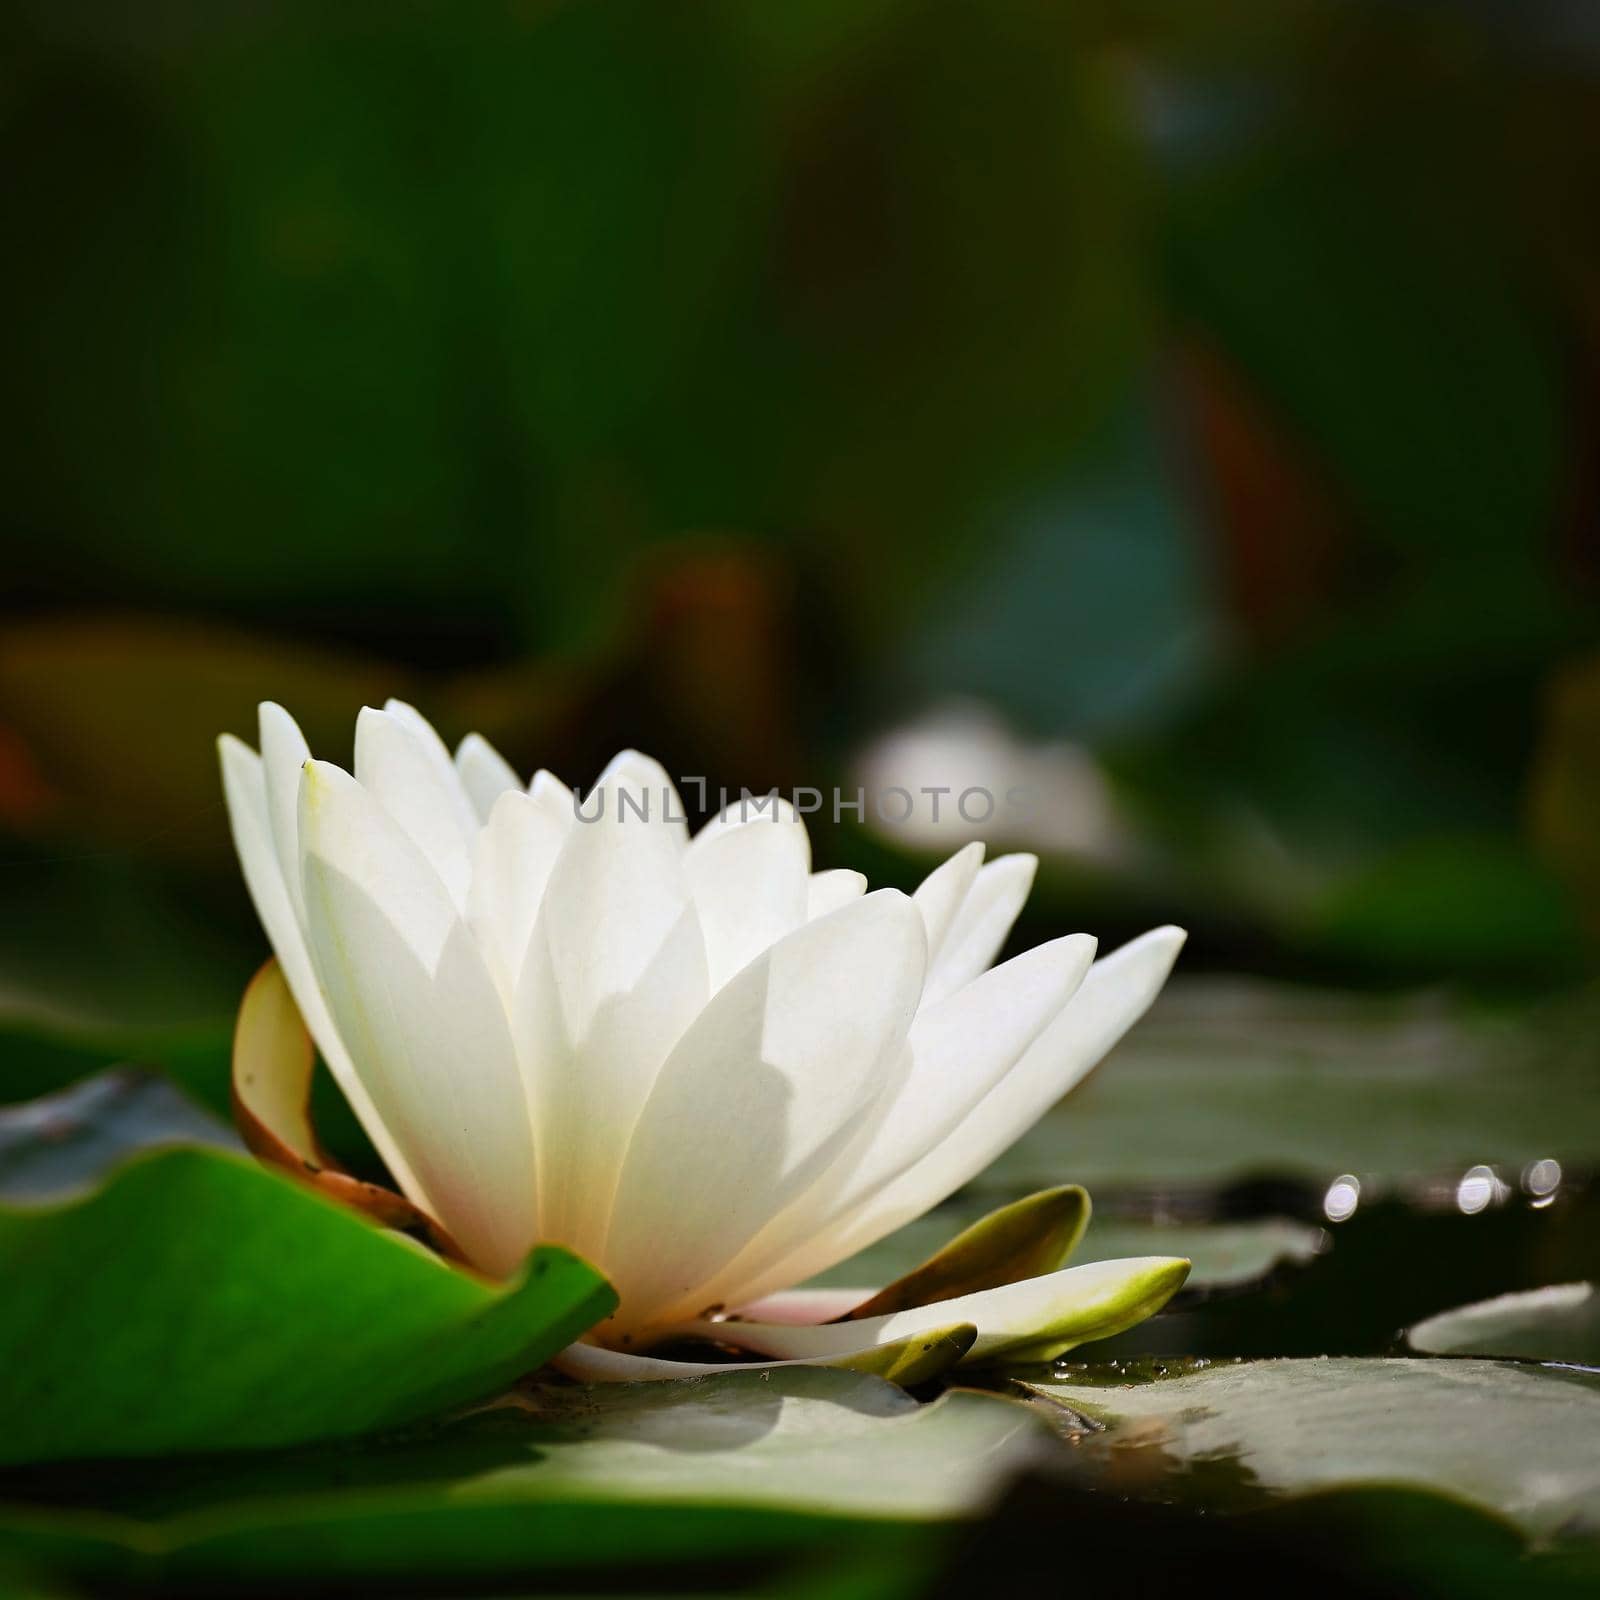 Nature - flower. Beautiful white water lily on the water surface. Colorful background. by Montypeter